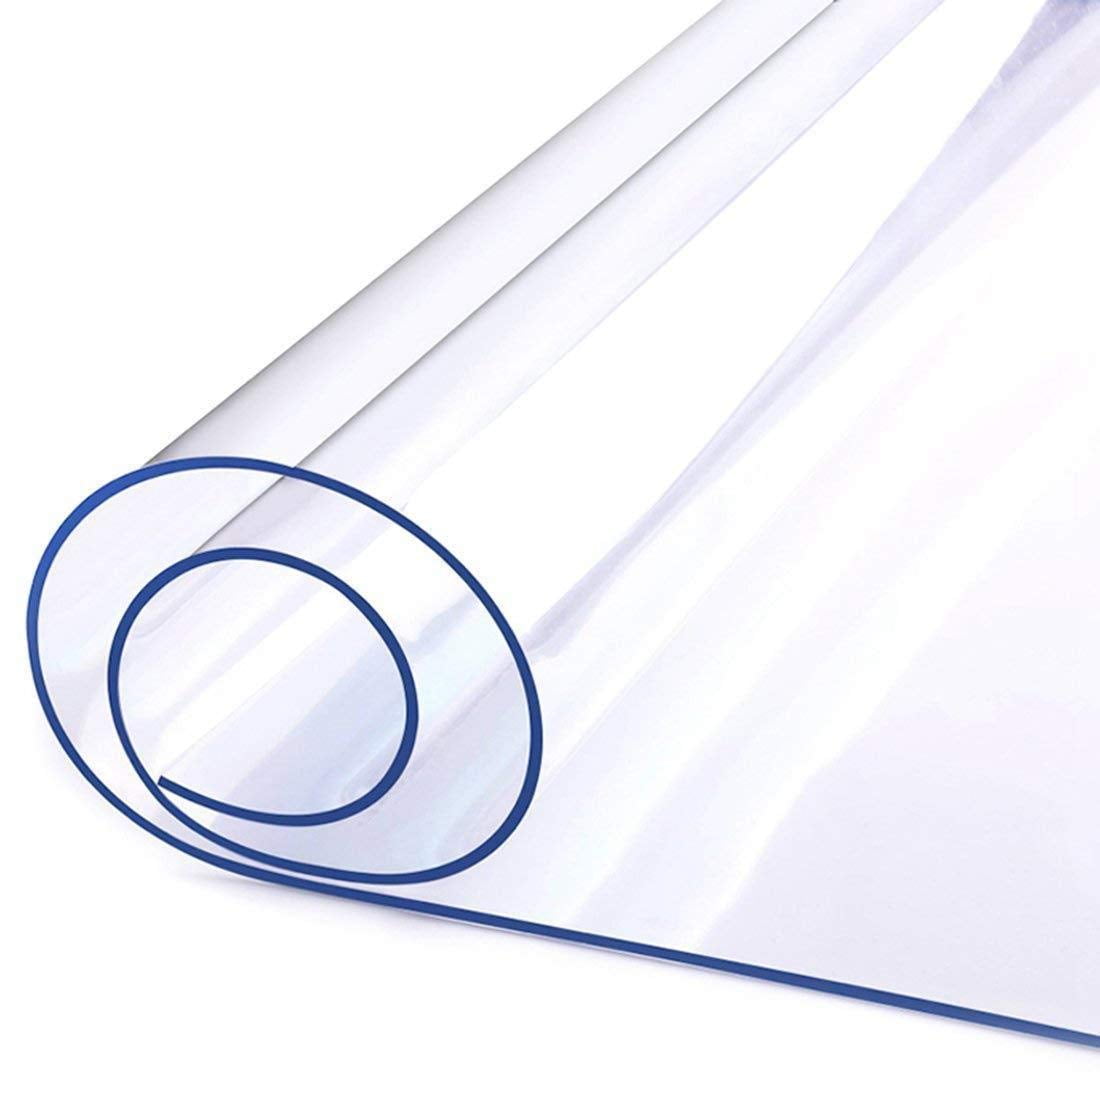 24 x 36 Inches, 1.5mm Eralove Rectangle 1.5mm & 2mm Thick Crystal Clear Table Top Protector Plastic Transparent PVC Tablecloth Kitchen Dining Room Wood Furniture Protective Cover 